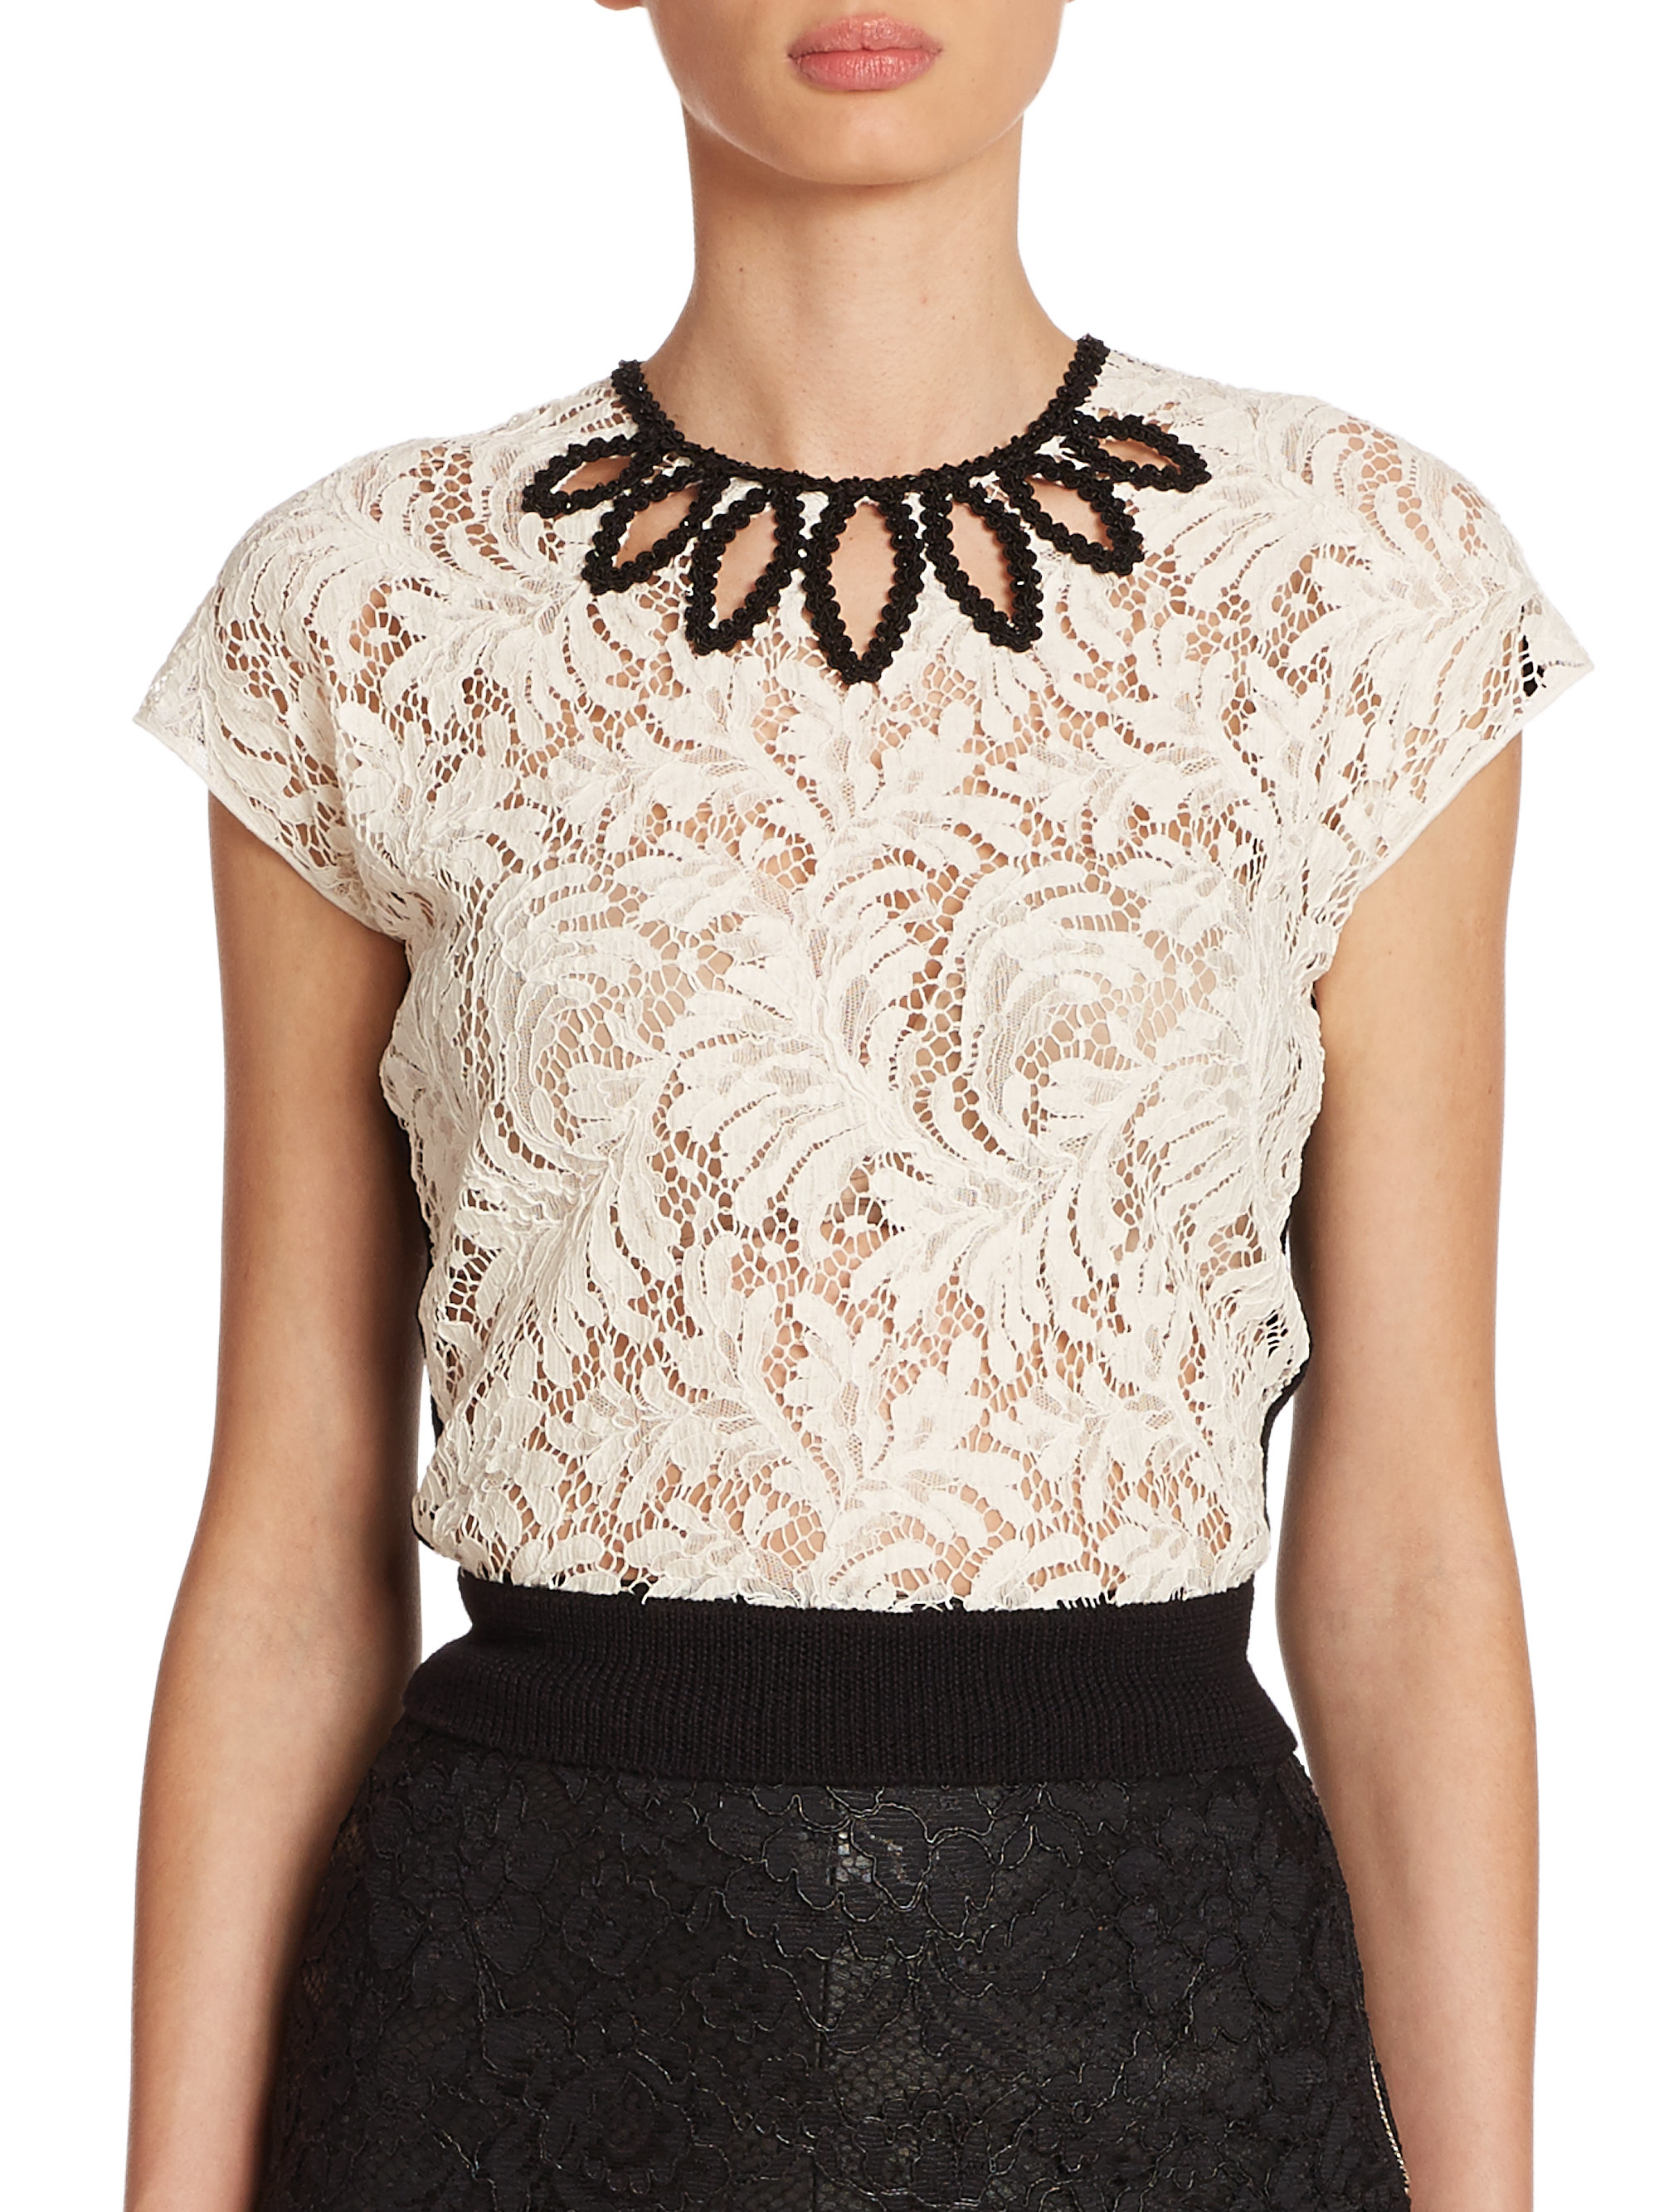 Lyst - Saint Laurent Lace & Wool Embellished Top in White